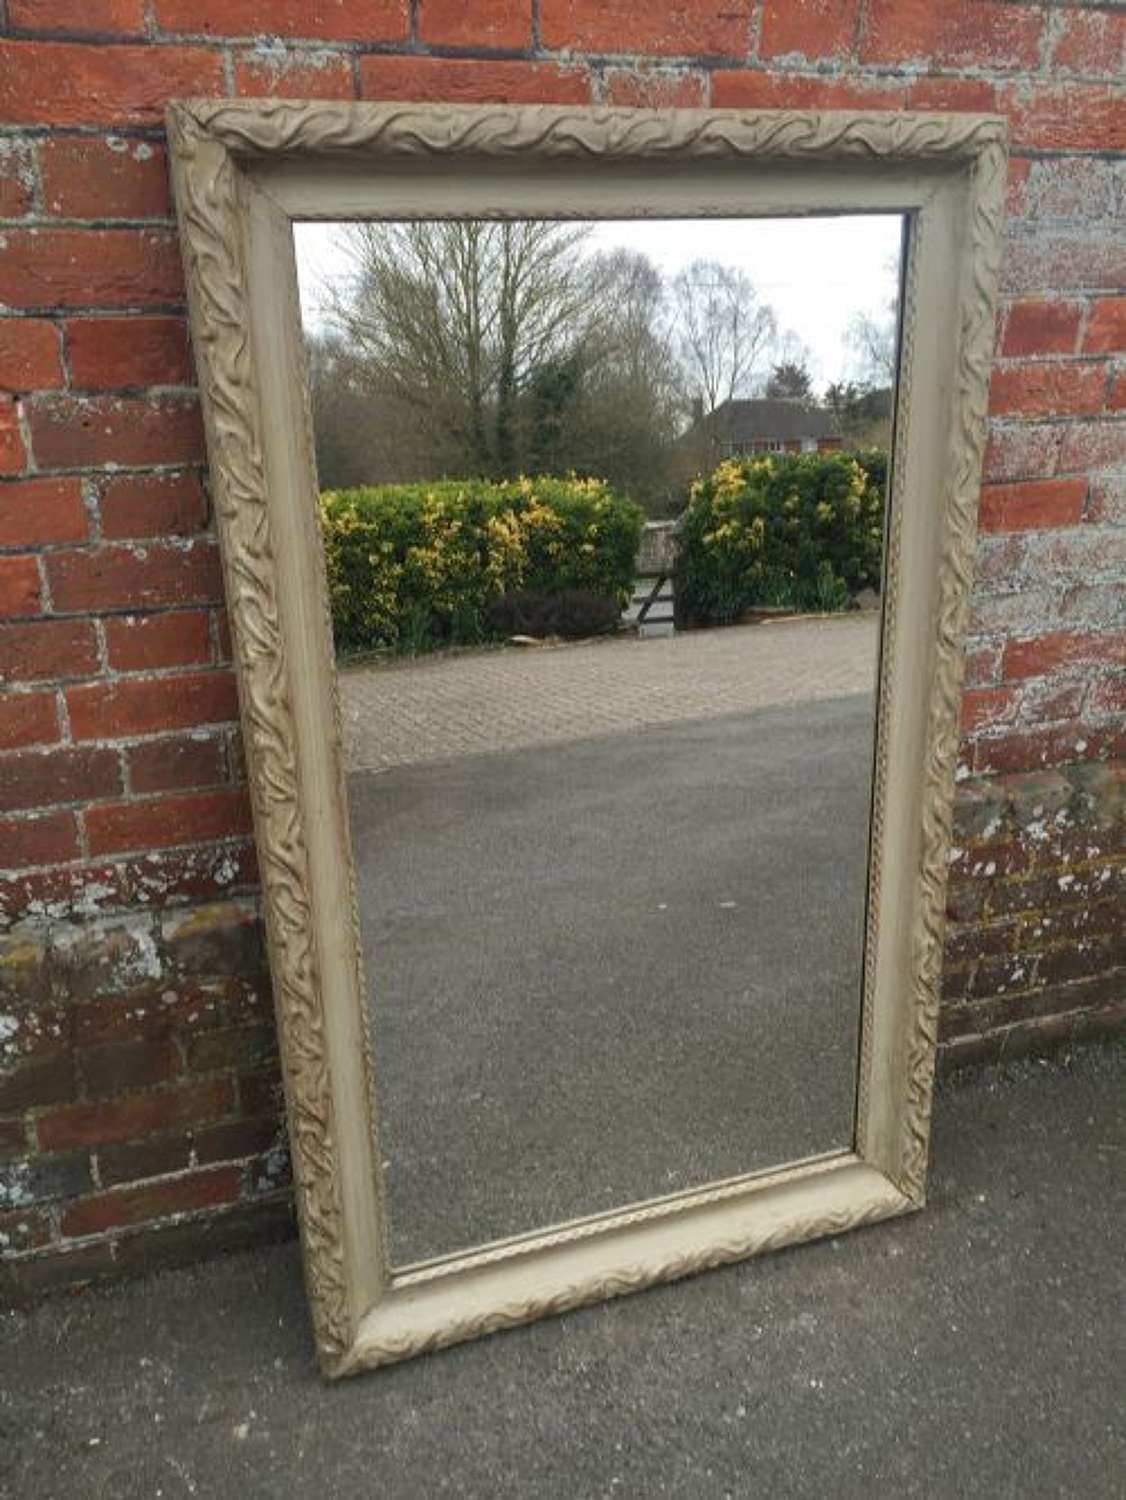 A Large Antique 19th Century French Carved Wood Painted Mirror.